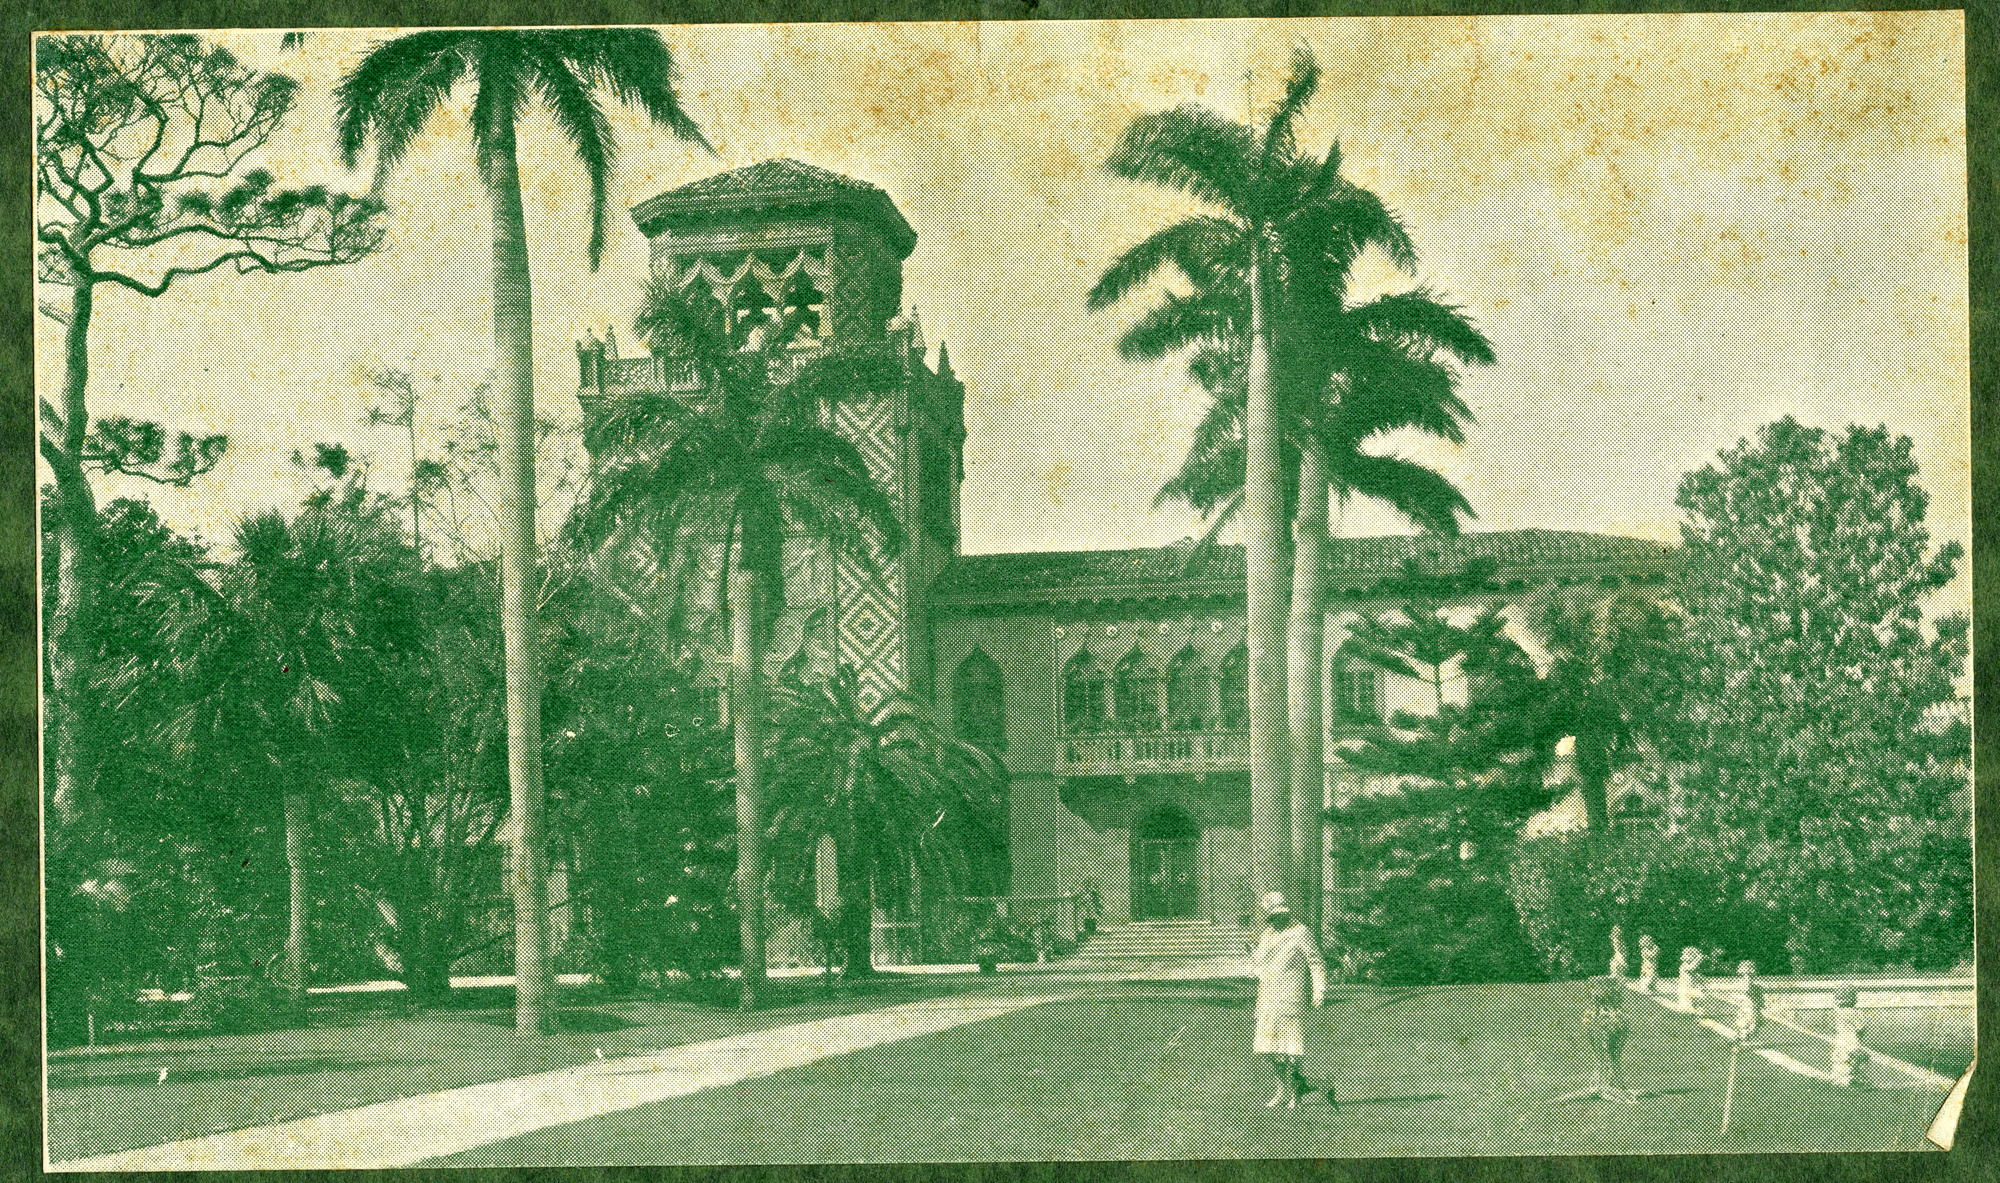 Mable Ringling walks the Ca’ d’Zan grounds.